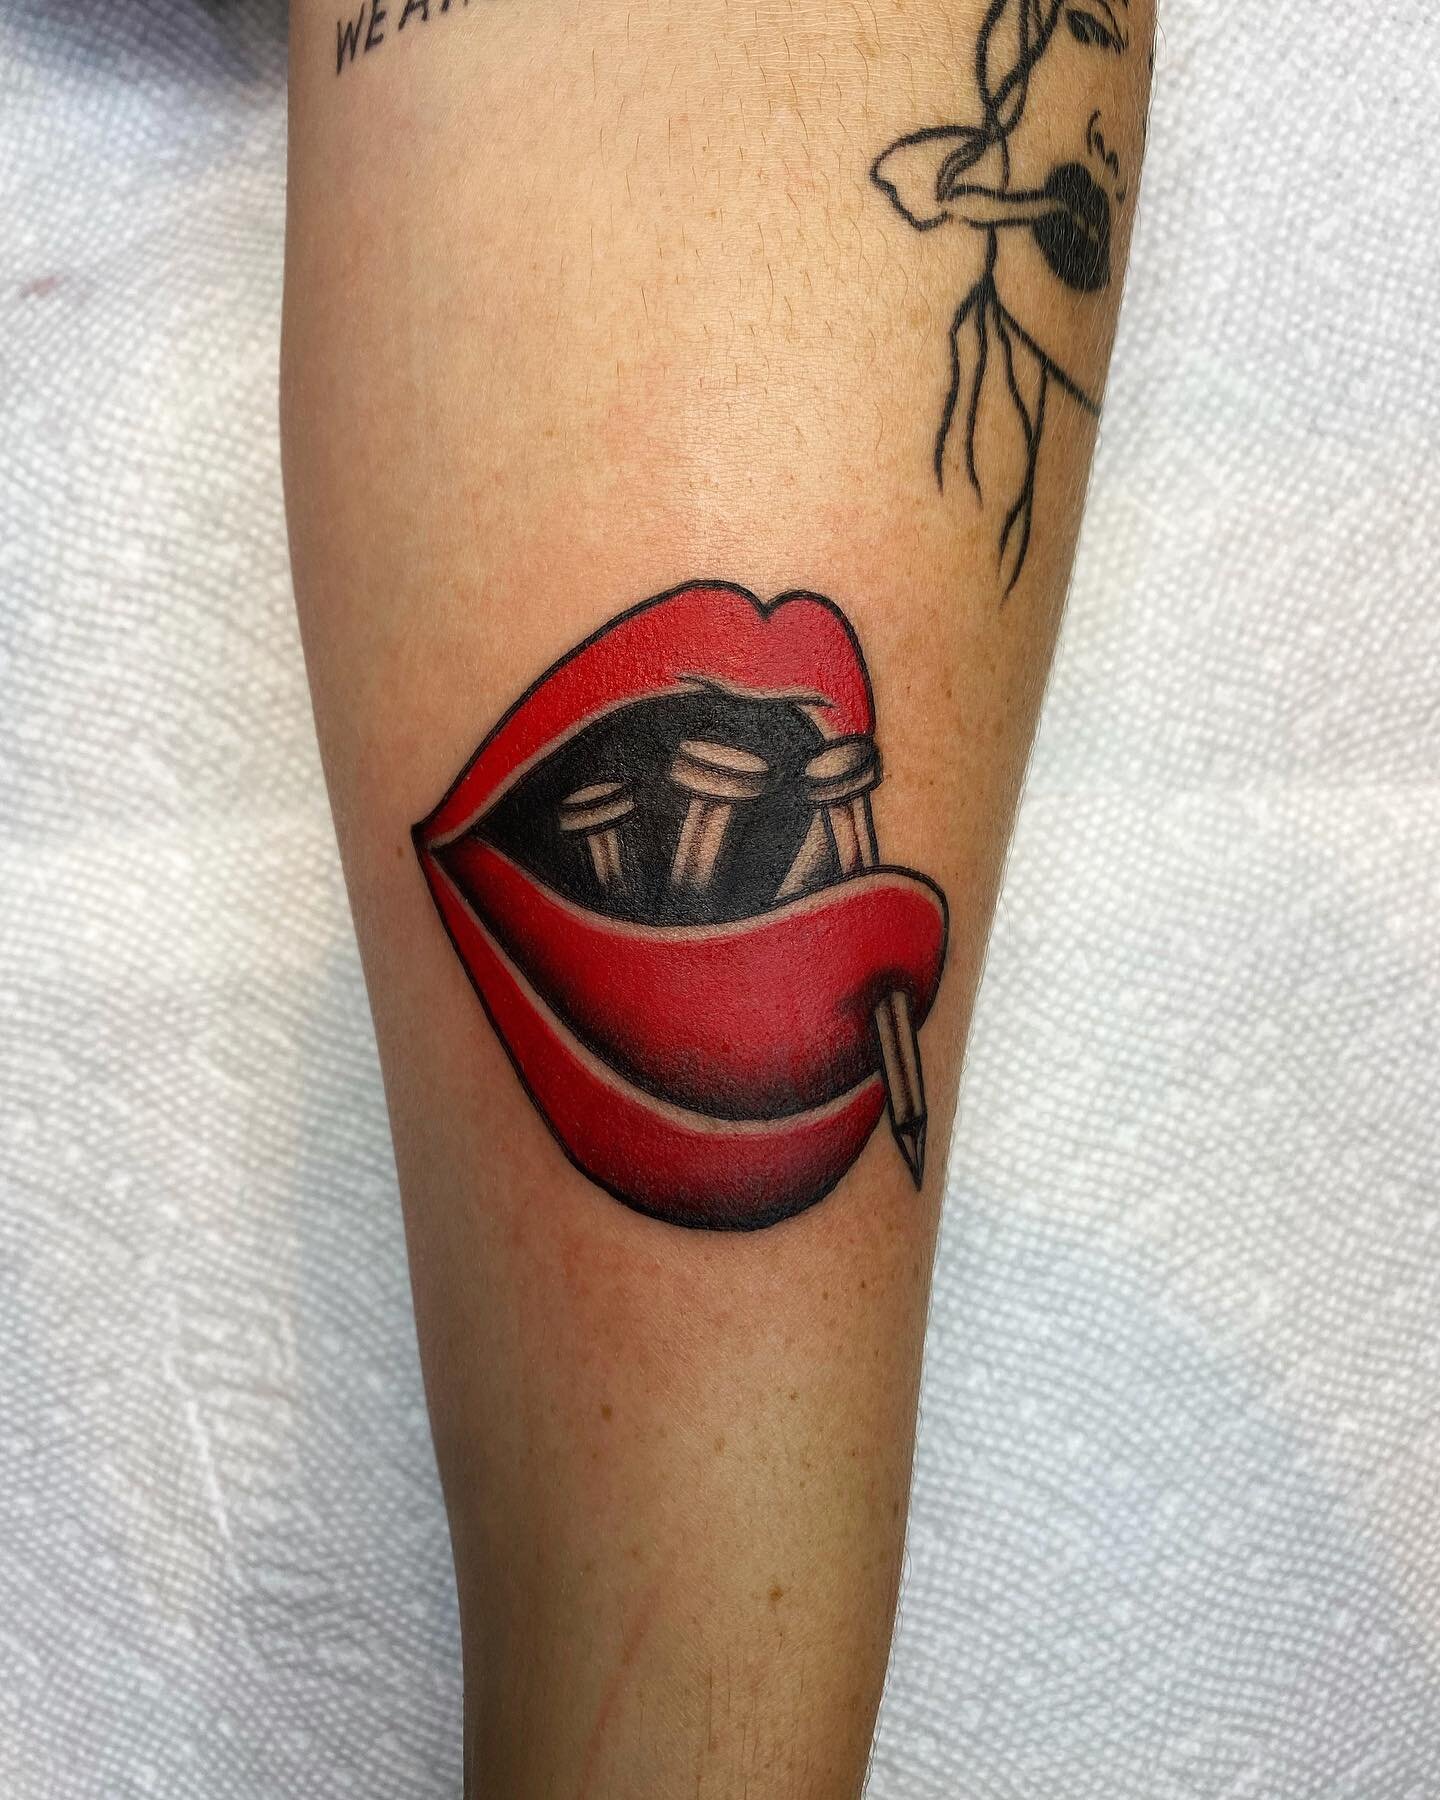 nail mouth from my flash, thanks for getting this ali!

done at @familytattoo